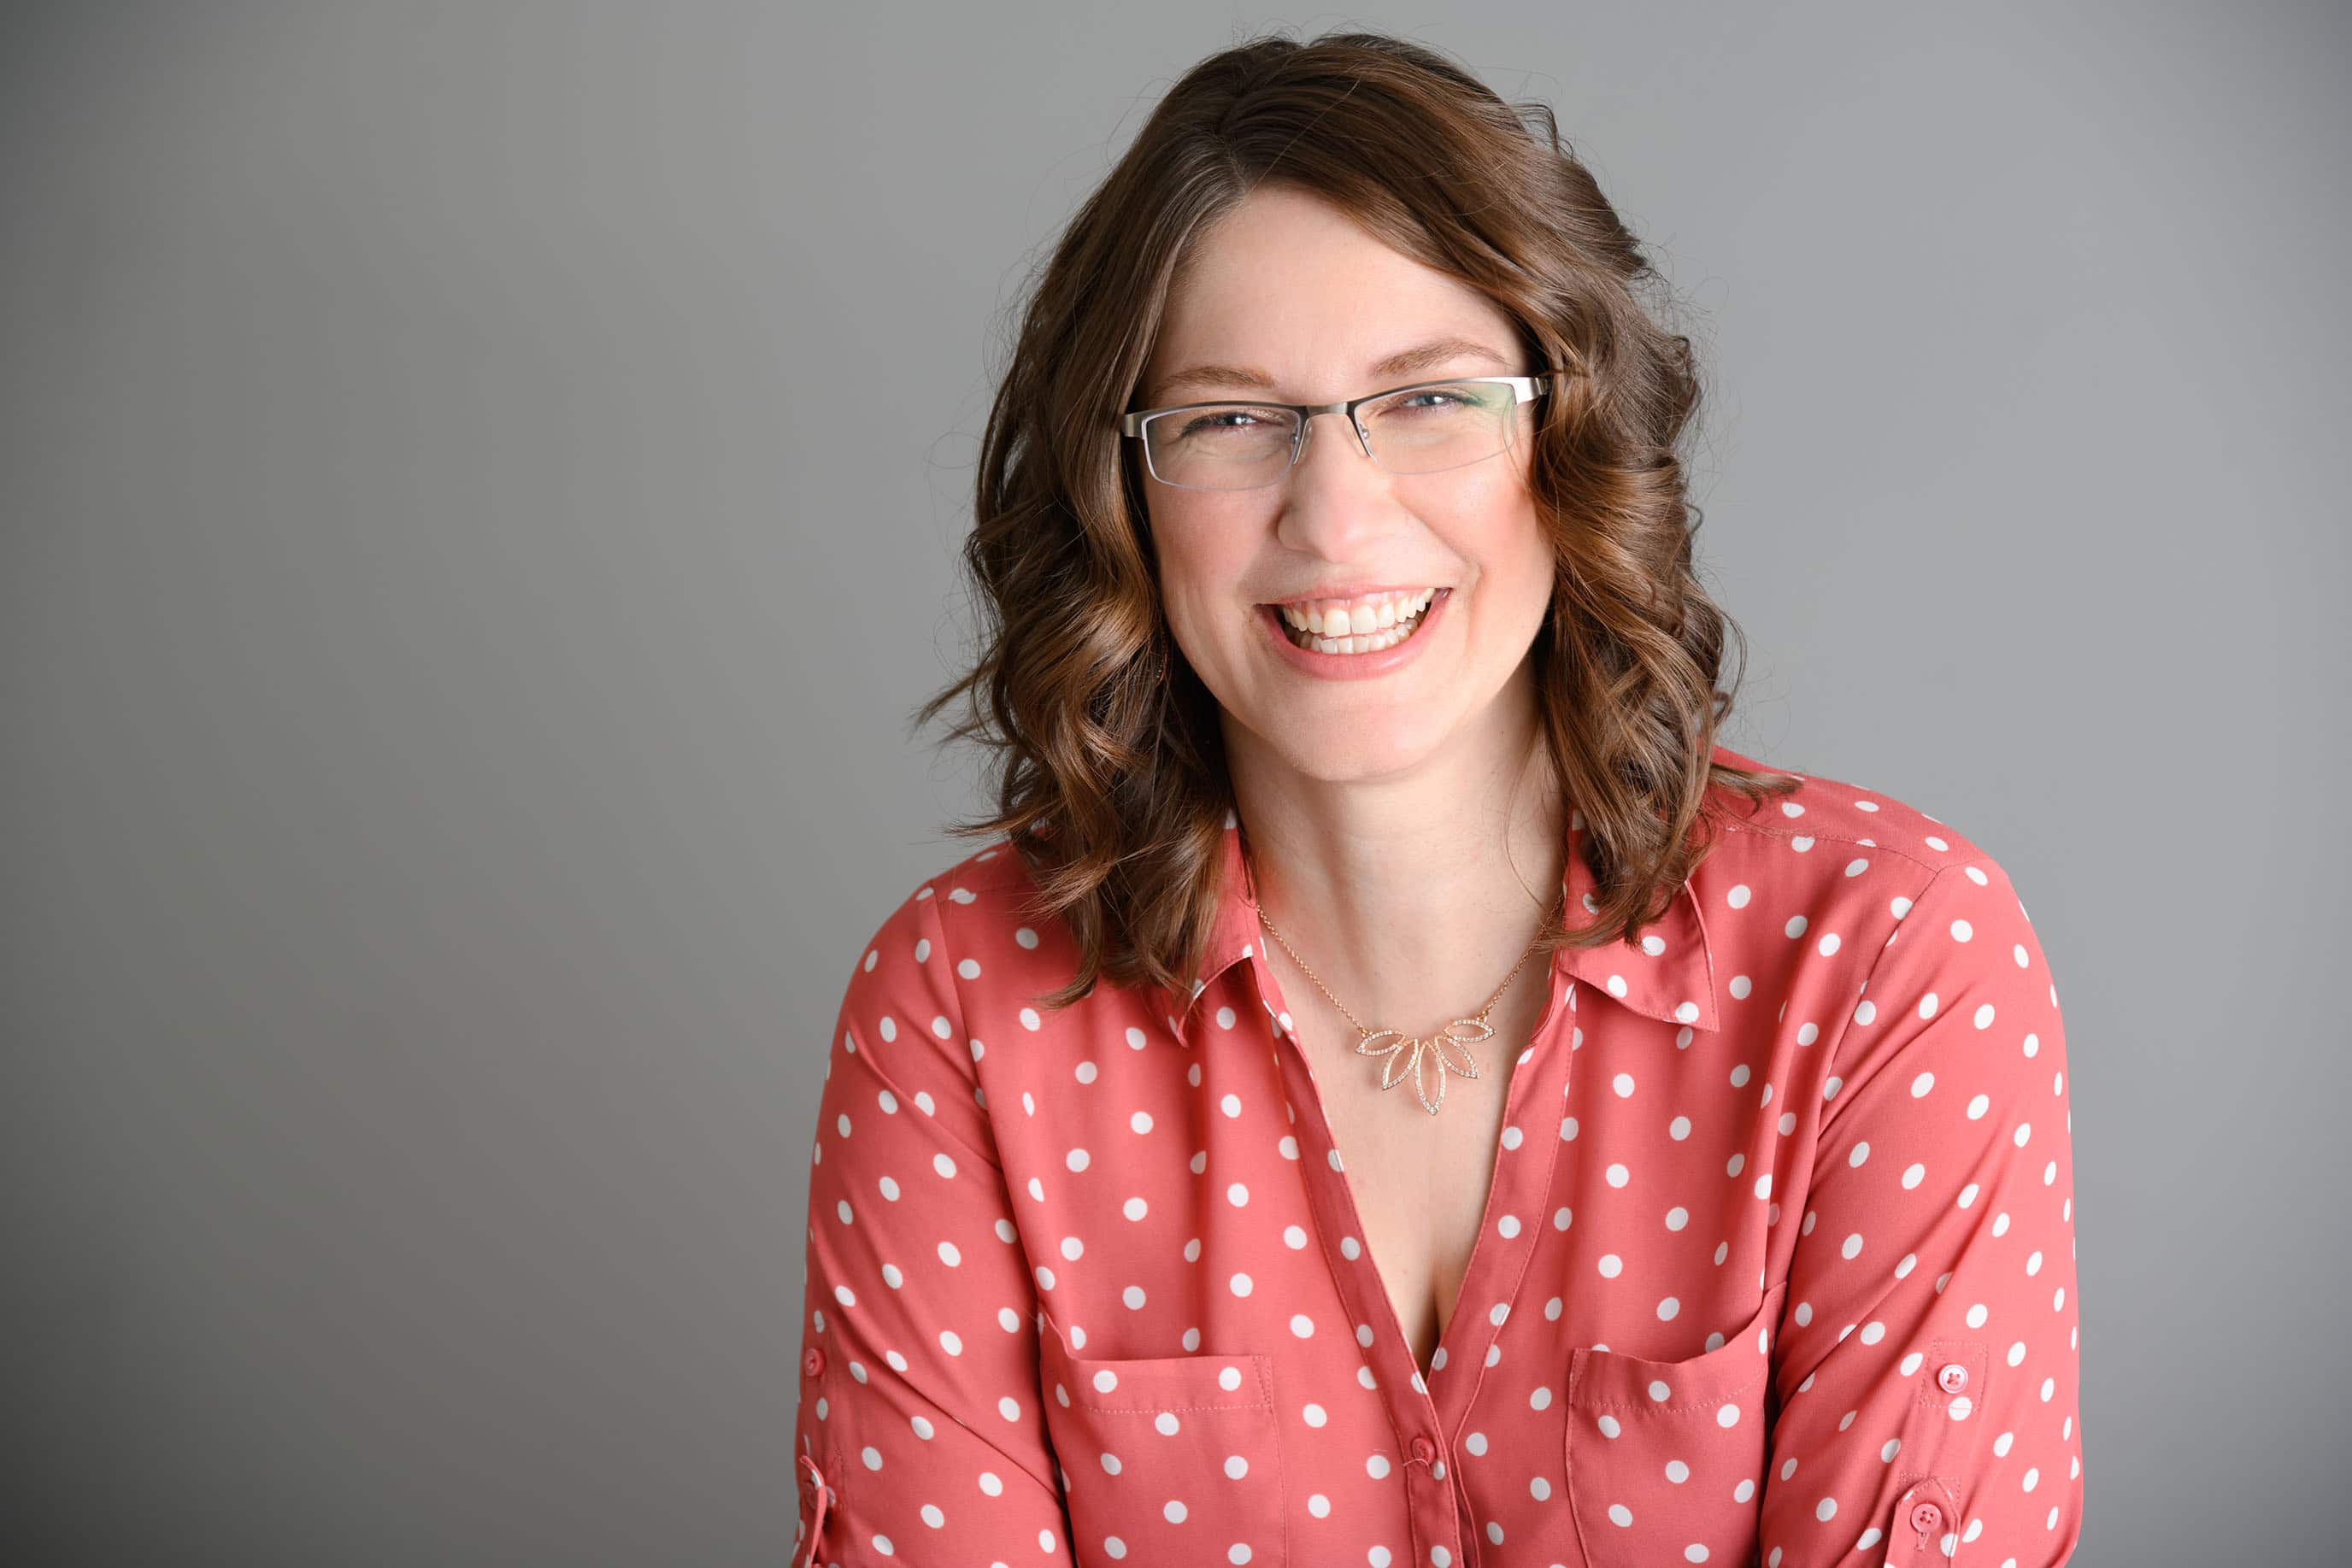 Headshot of a brunette woman with glasses in a red button-down polka dot shirt